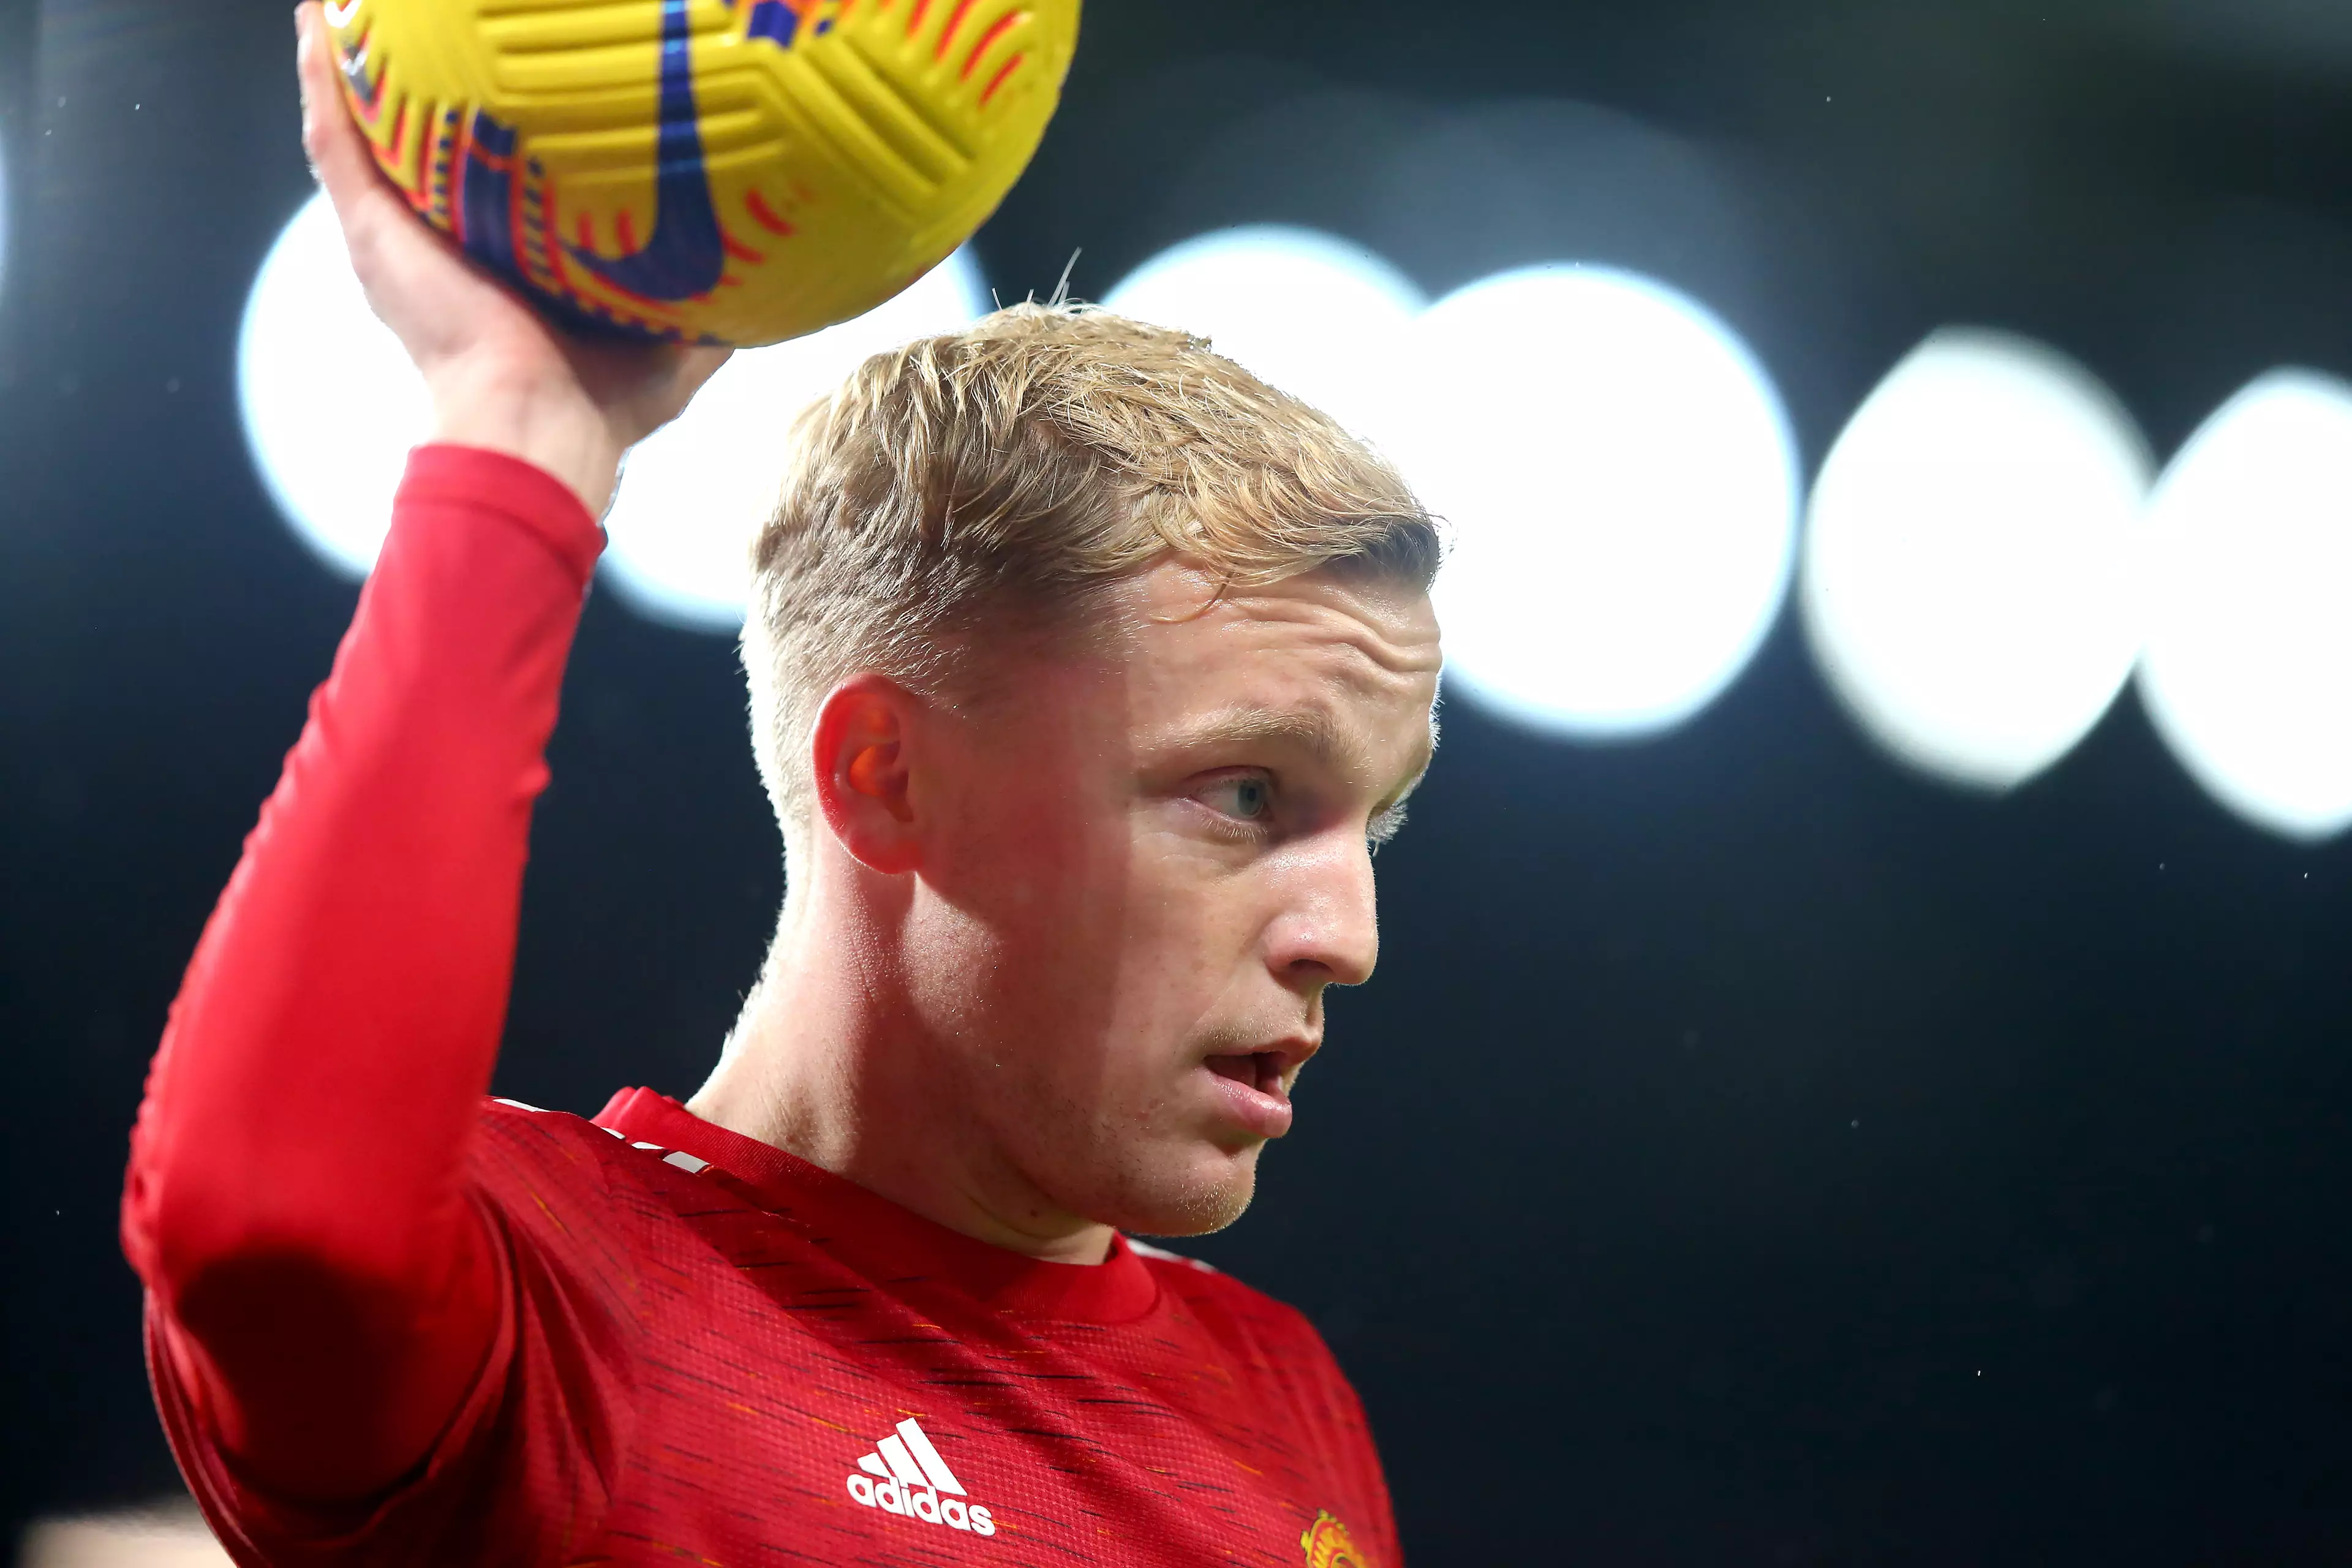 Van de Beek was overlooked against Southampton earlier this month for Scott McTominay, who was carrying an injury. (Image